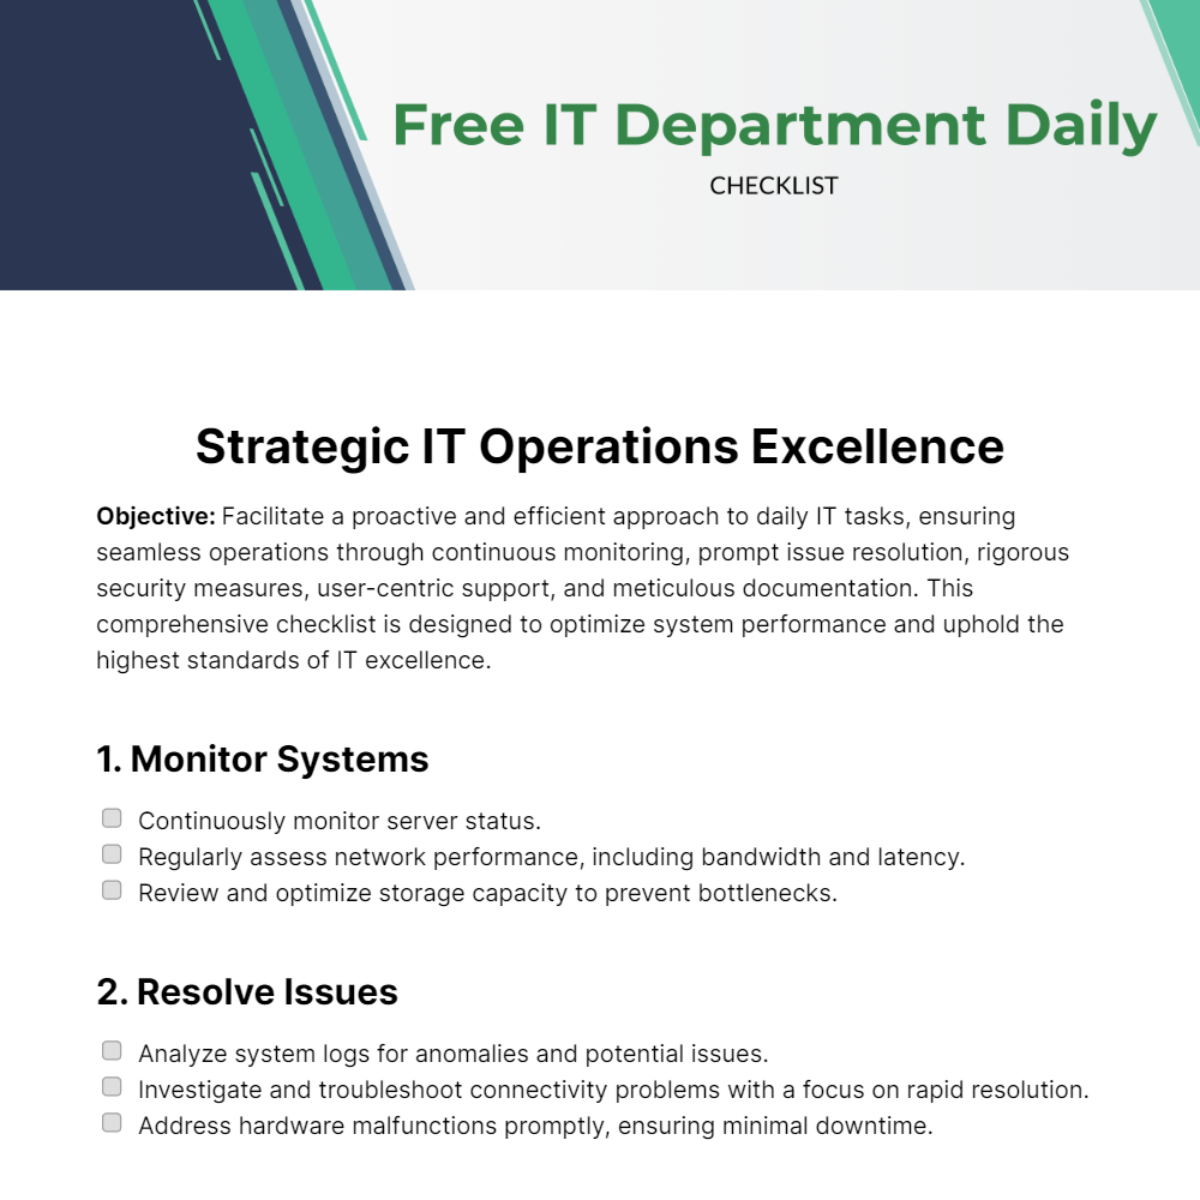 Free IT Department Daily Checklist Template